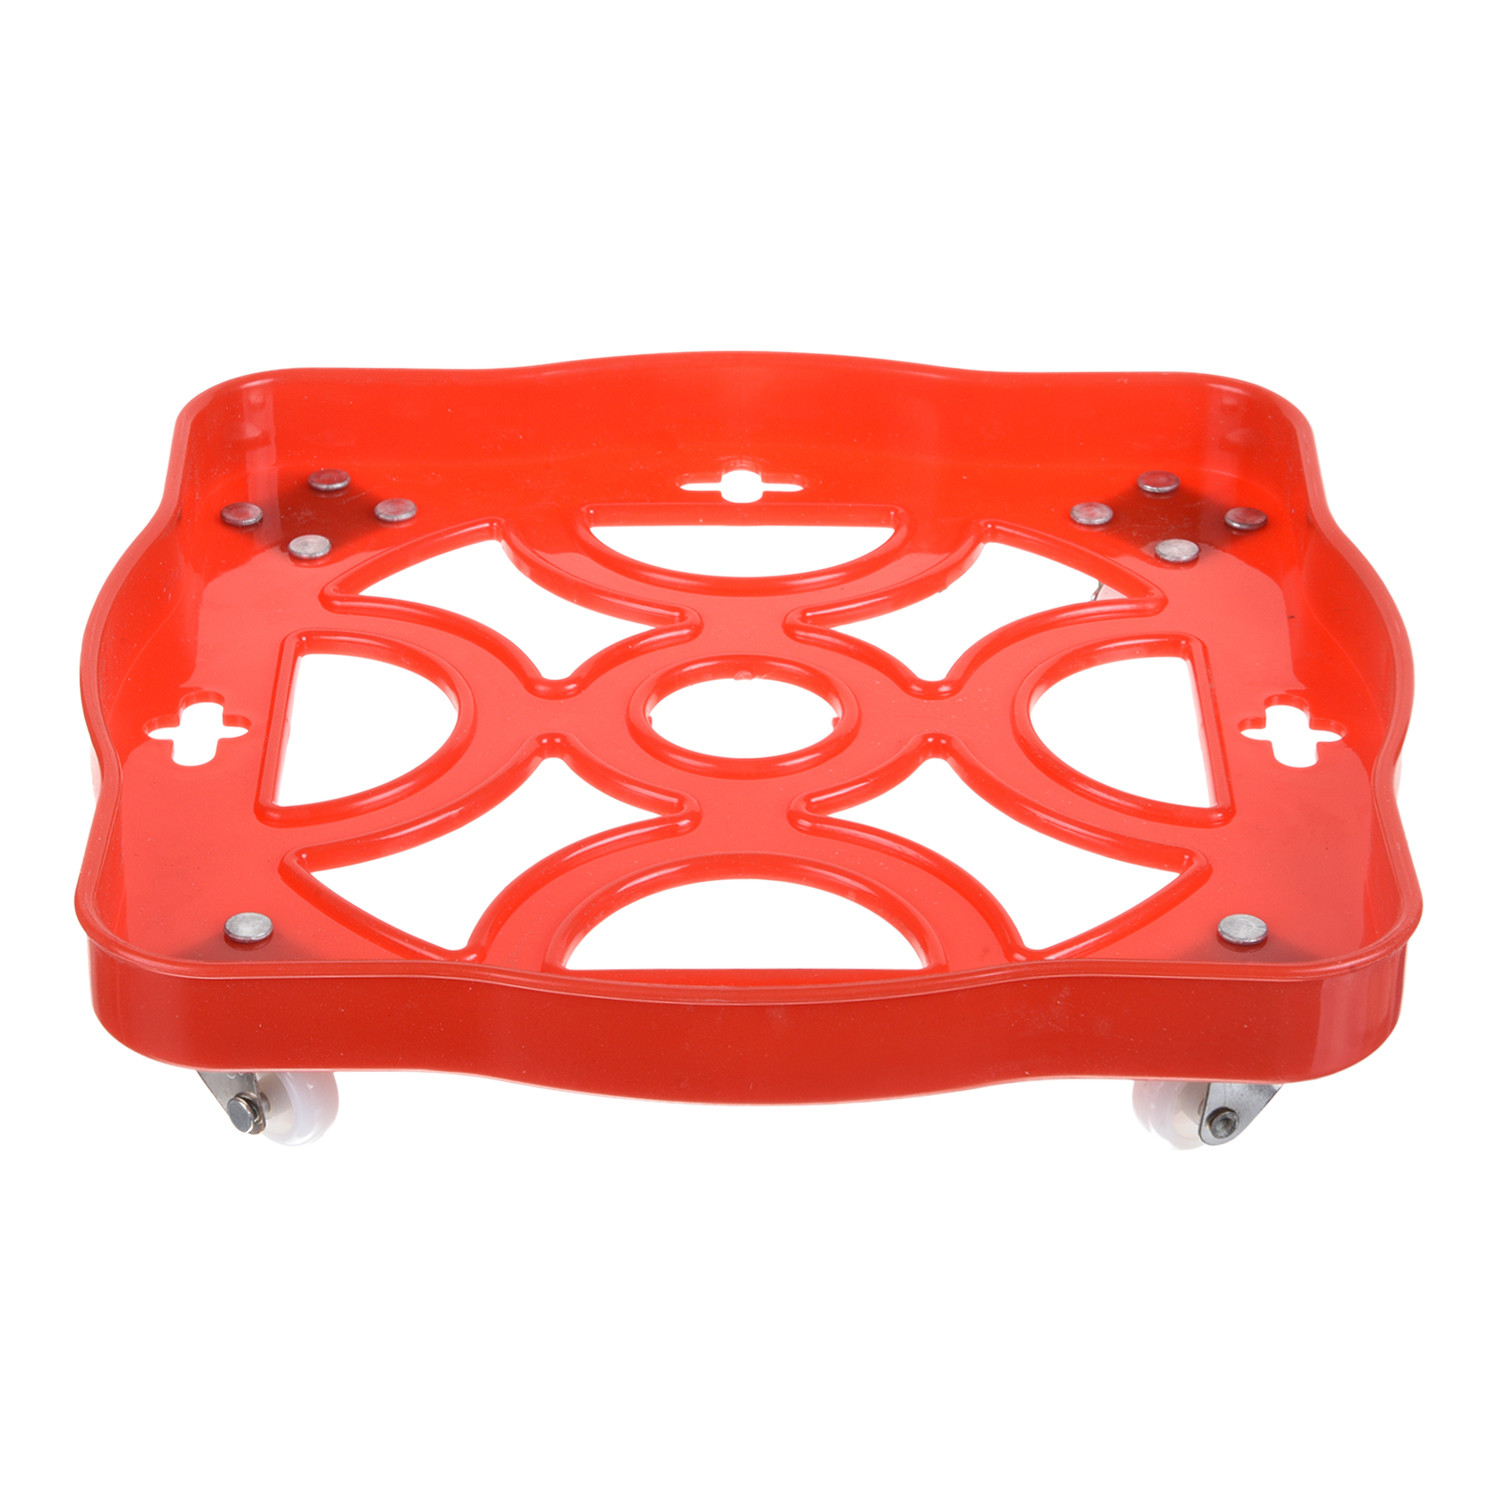 Kuber Industries Cylinder Stand|Unbreakable Plastic Gas Cylinder Stand|LPG Cylinder Stand|Gas Trolly|Square Shape Cylinder Trolley With Wheels (Red)